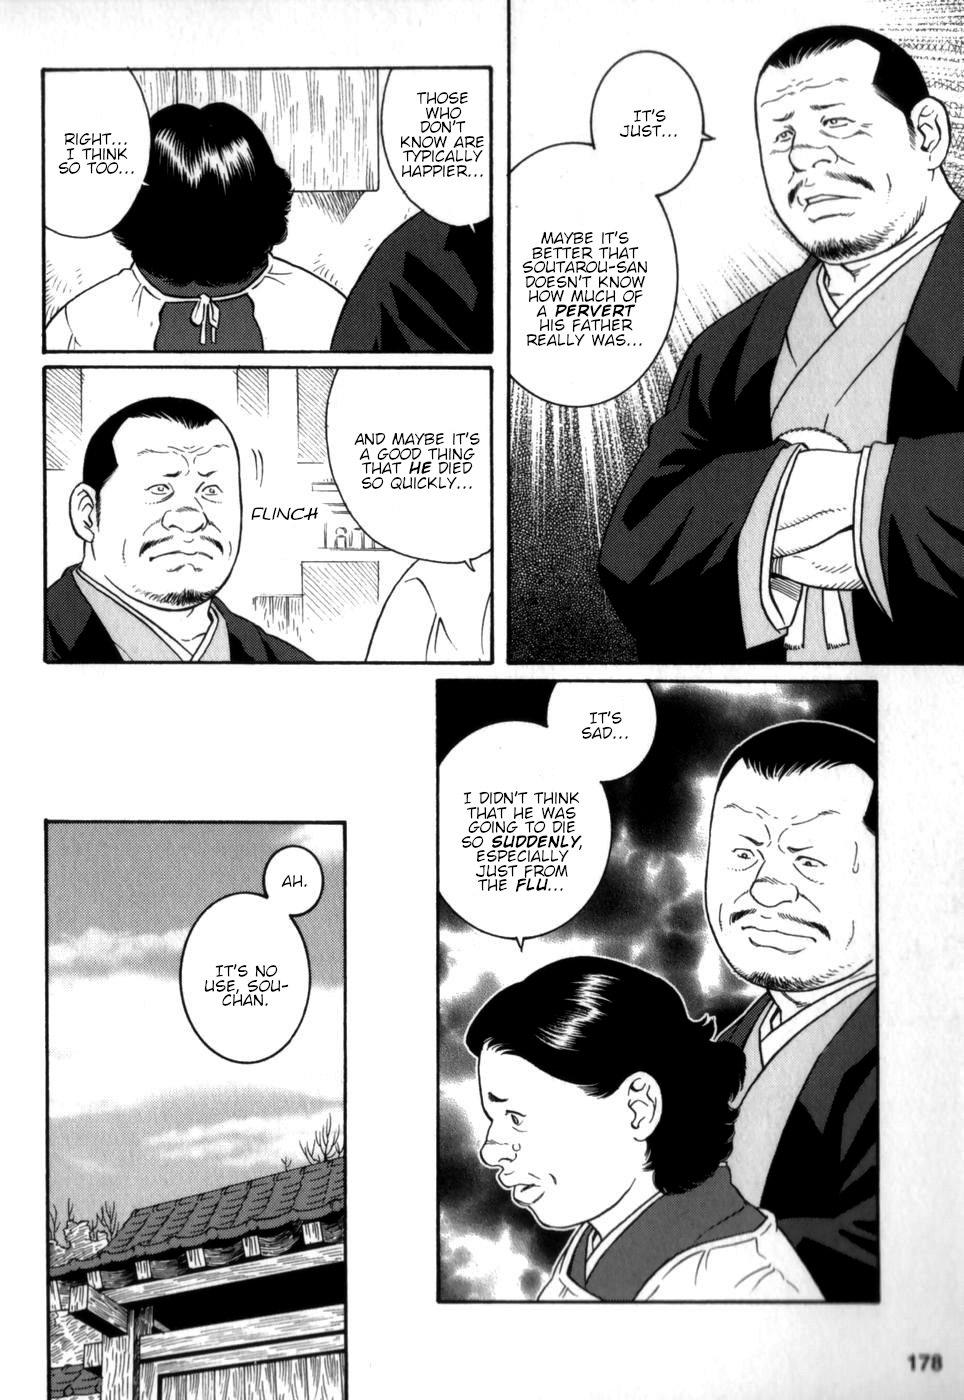 Negra Gedou no Ie Chuukan | House of Brutes Vol. 2 Ch. 6 Nut - Page 12